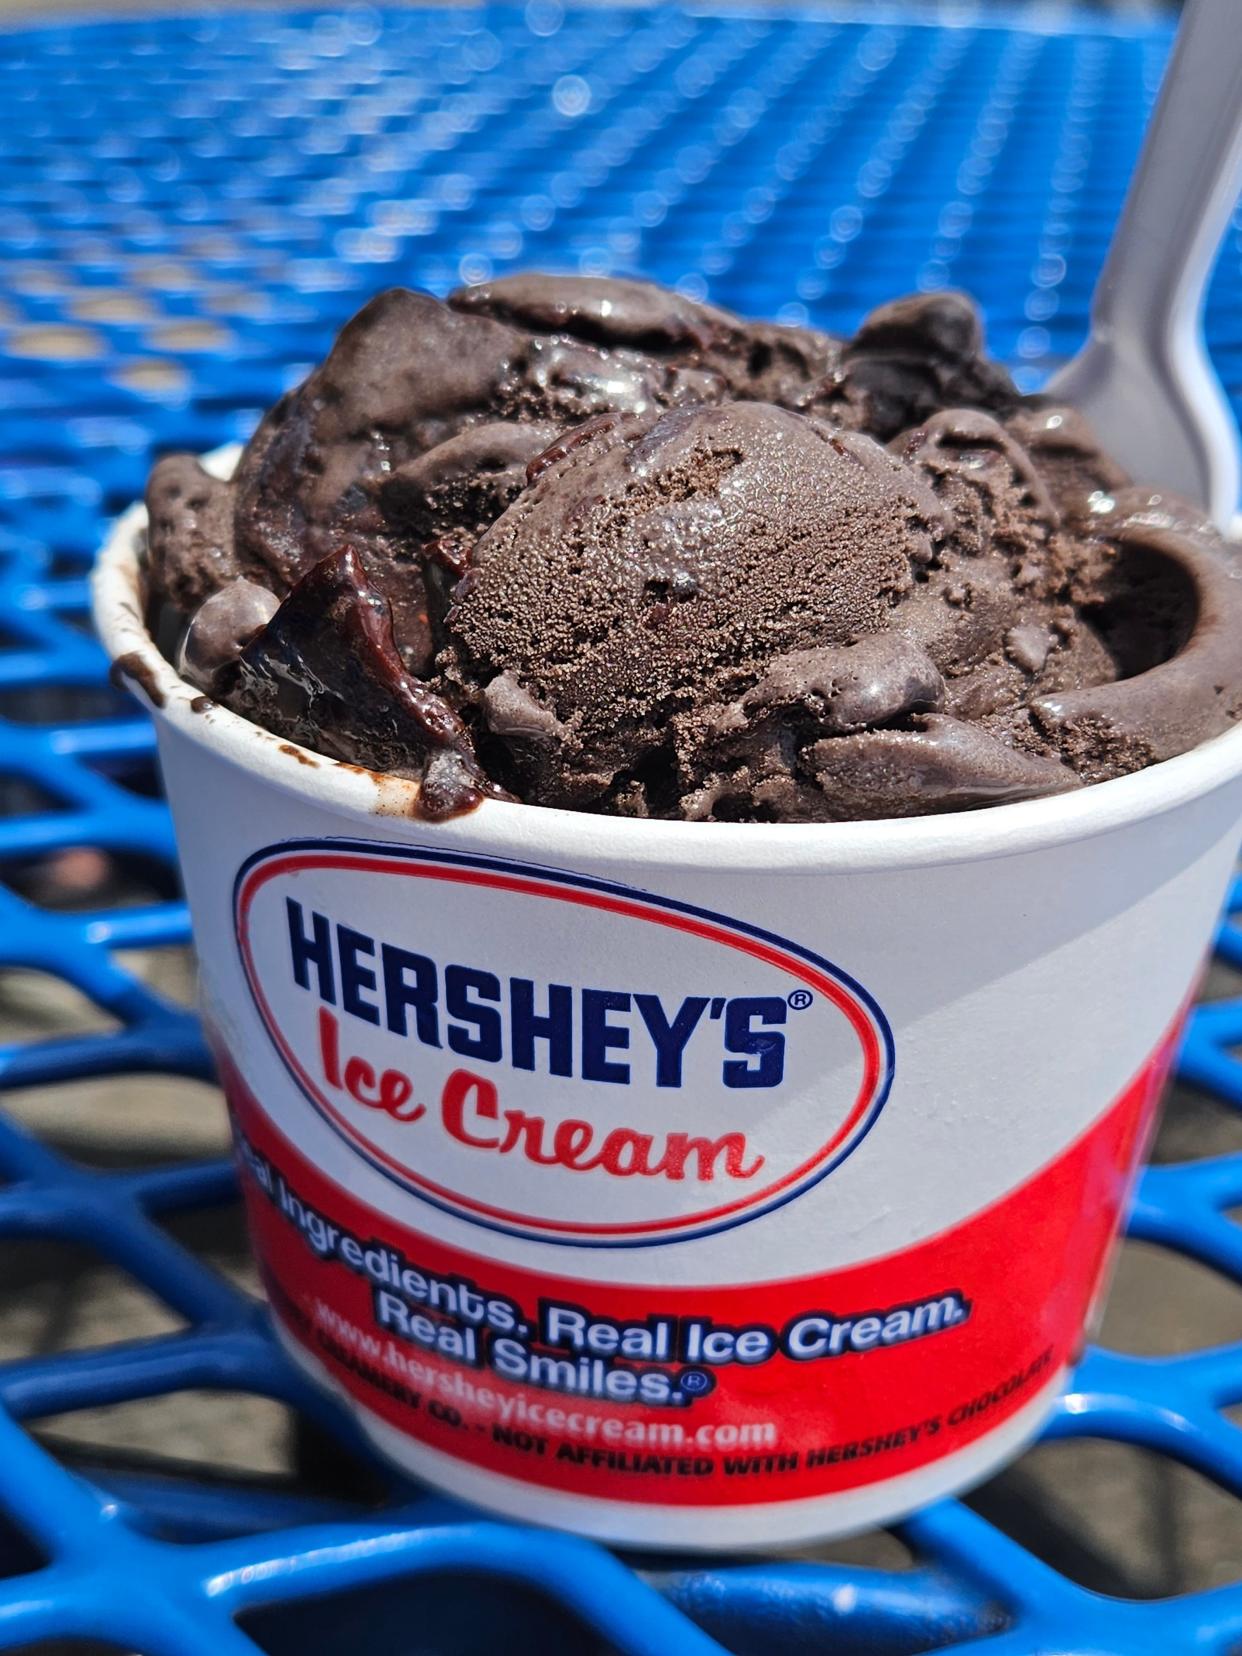 Hershey's ice cream may be found in a few places in Hattiesburg, including Igloo Creamery on Hardy Street and Nannie Mac's on West Fourth Street.